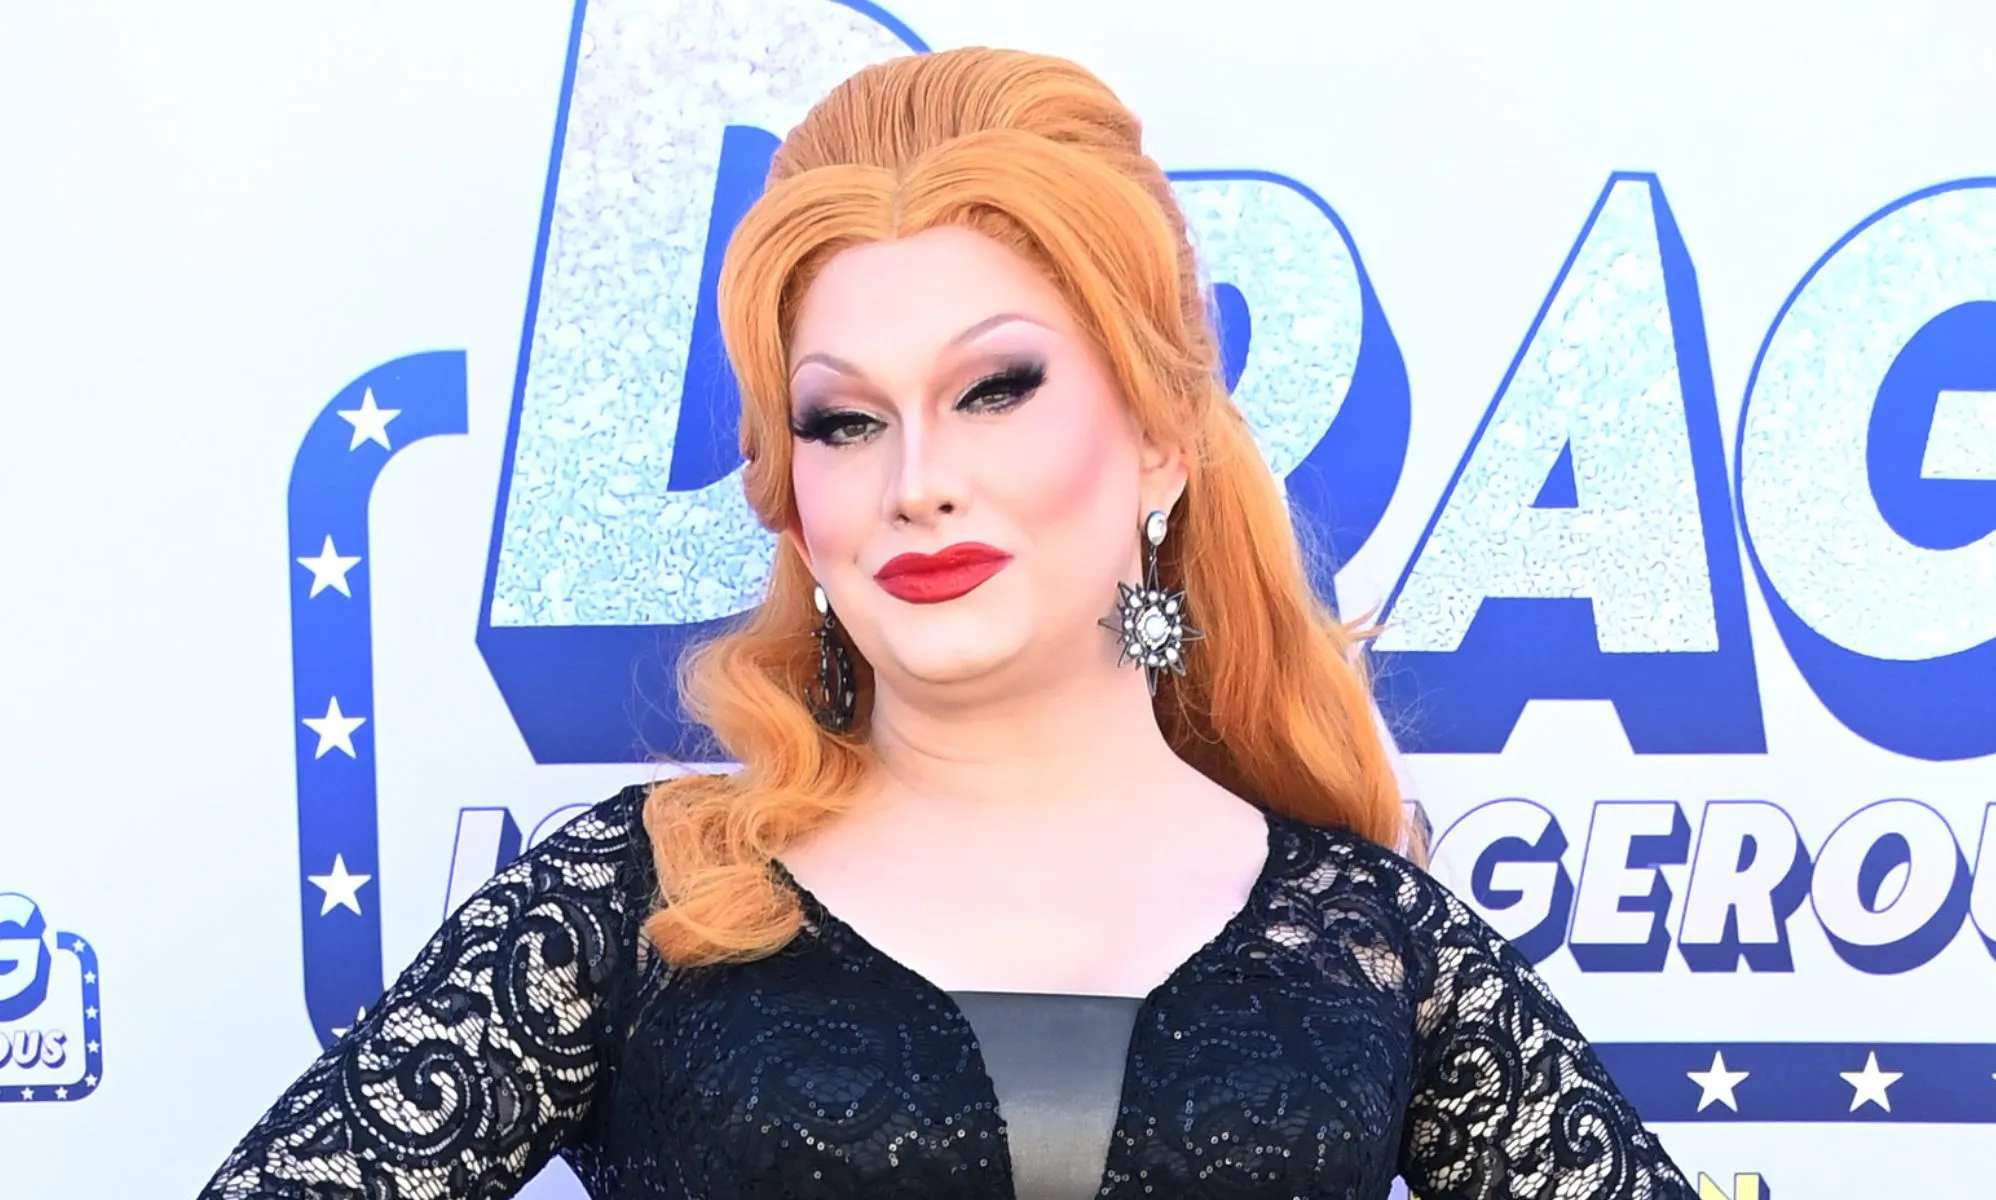 Drag Race fans and stars congratulate Jinkx Monsoon as she bags another big stage role